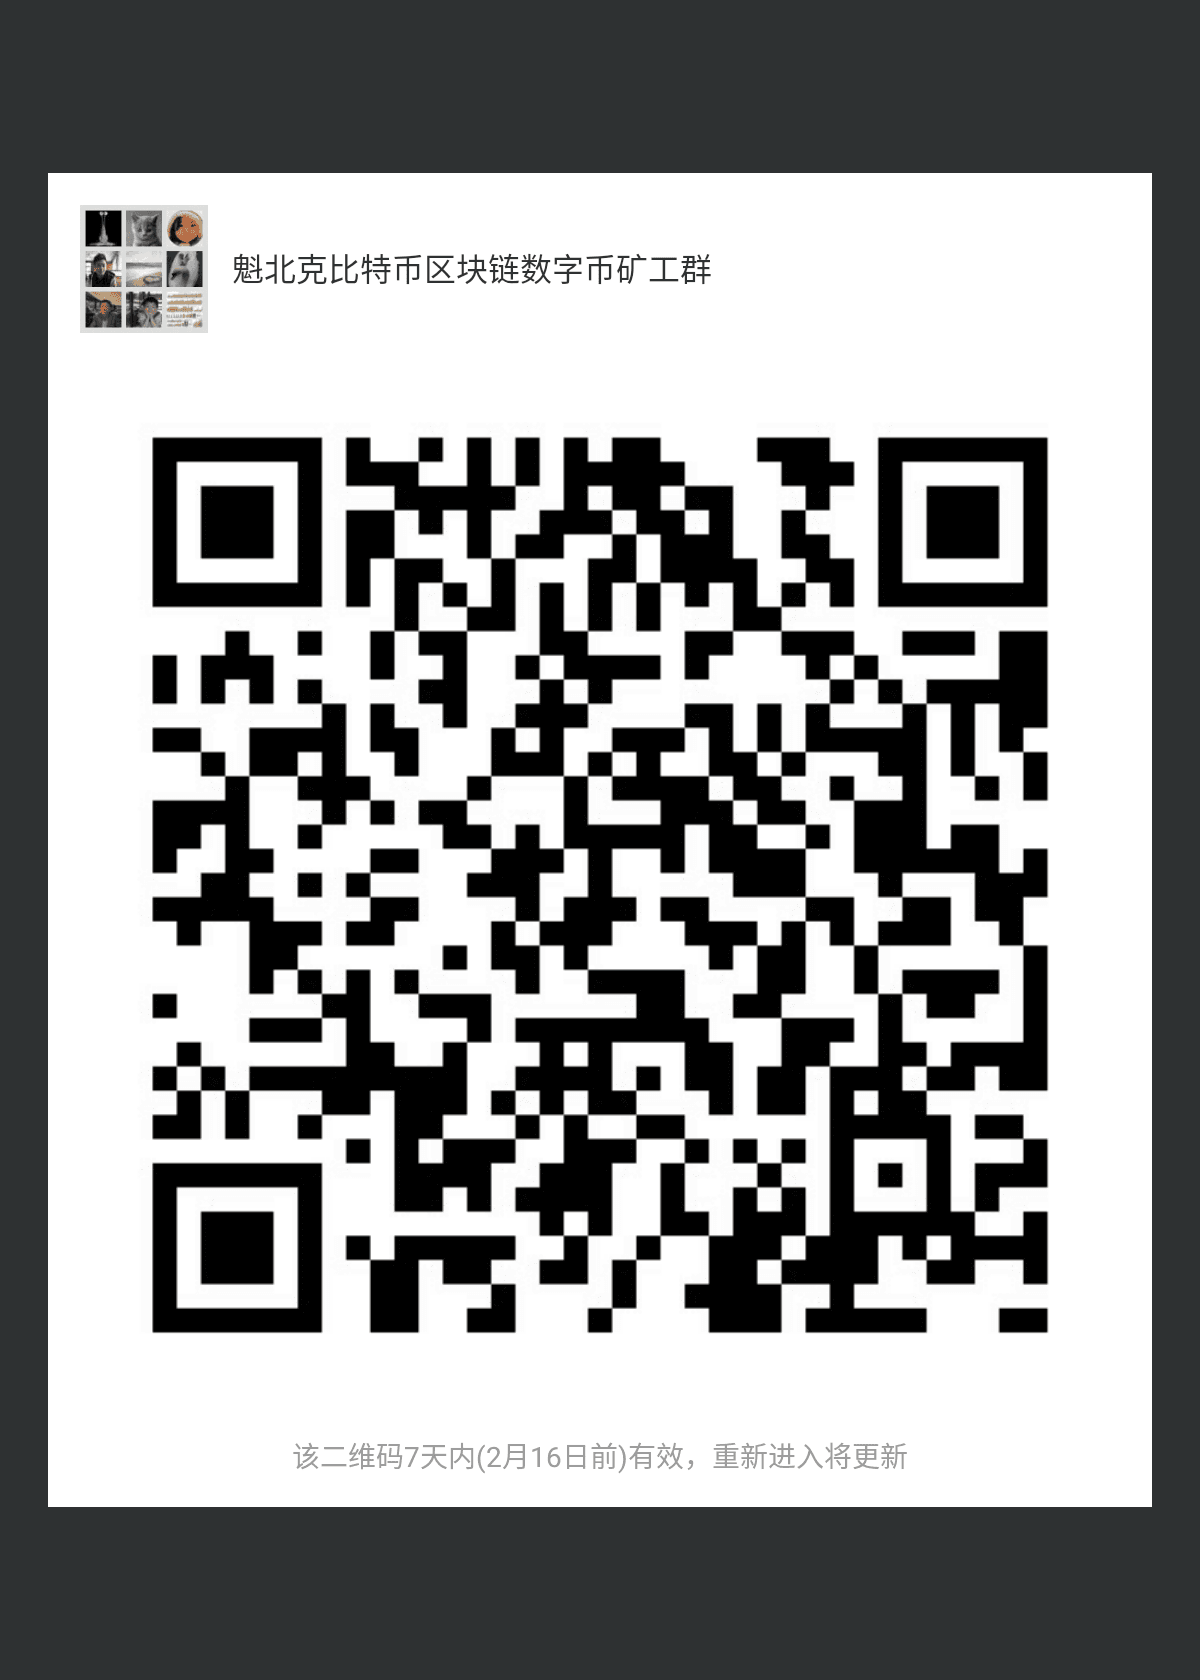 mmqrcode1518214612634.png